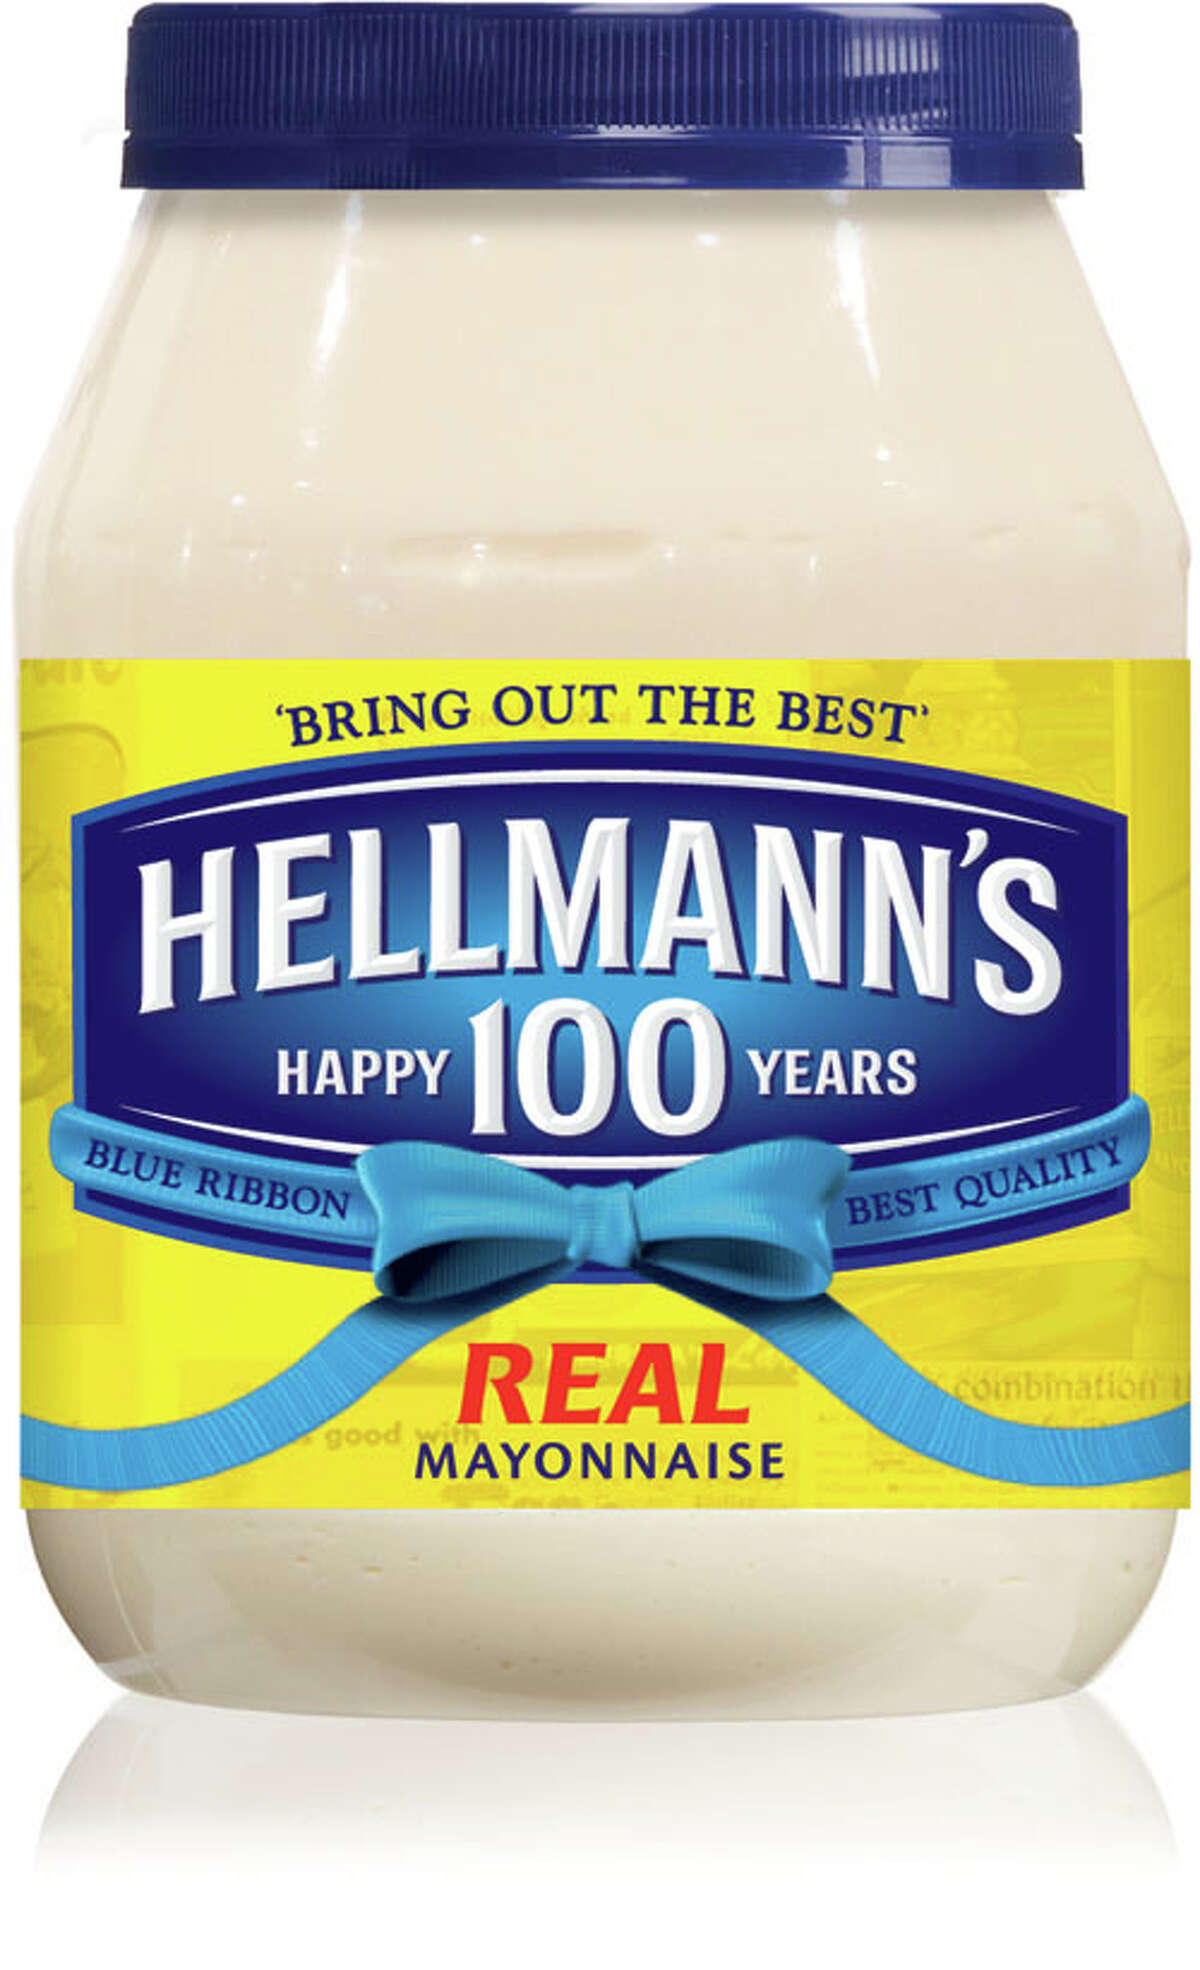 "One of my favorite things is mayonnaise and I have to tell you that. I love mayonnaise, but I don't eat it any more. If I do I put light mayonnaise on it, which I know is still not good but it's a lot better than the other one and I don't eat it that much."